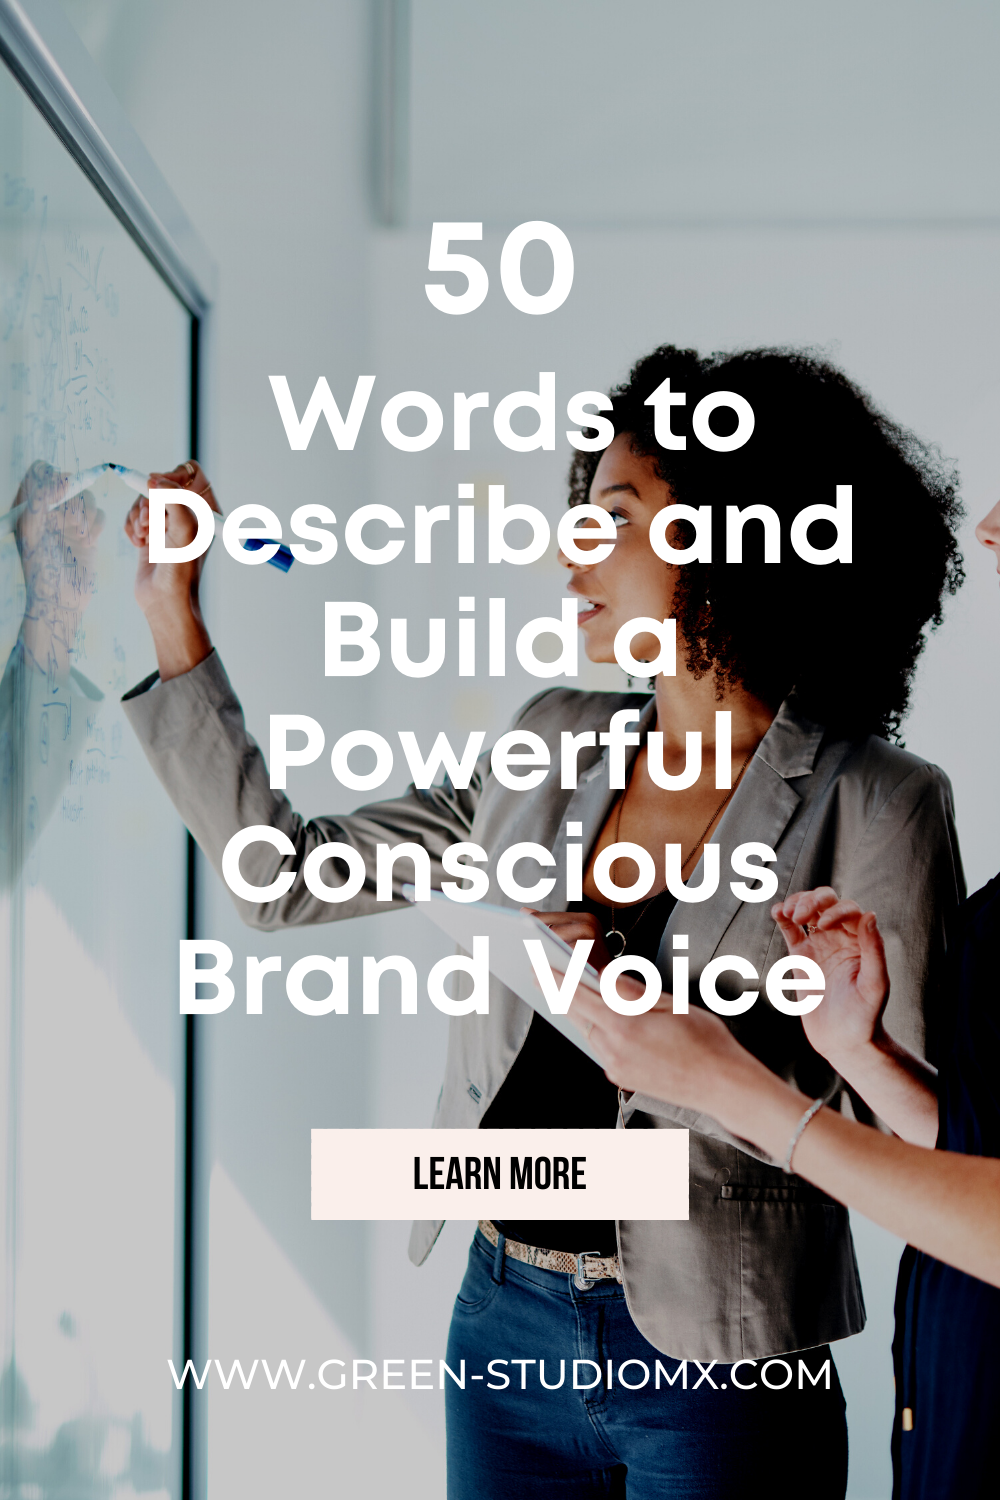 Words to Describe and Build a Powerful Conscious Brand Voice